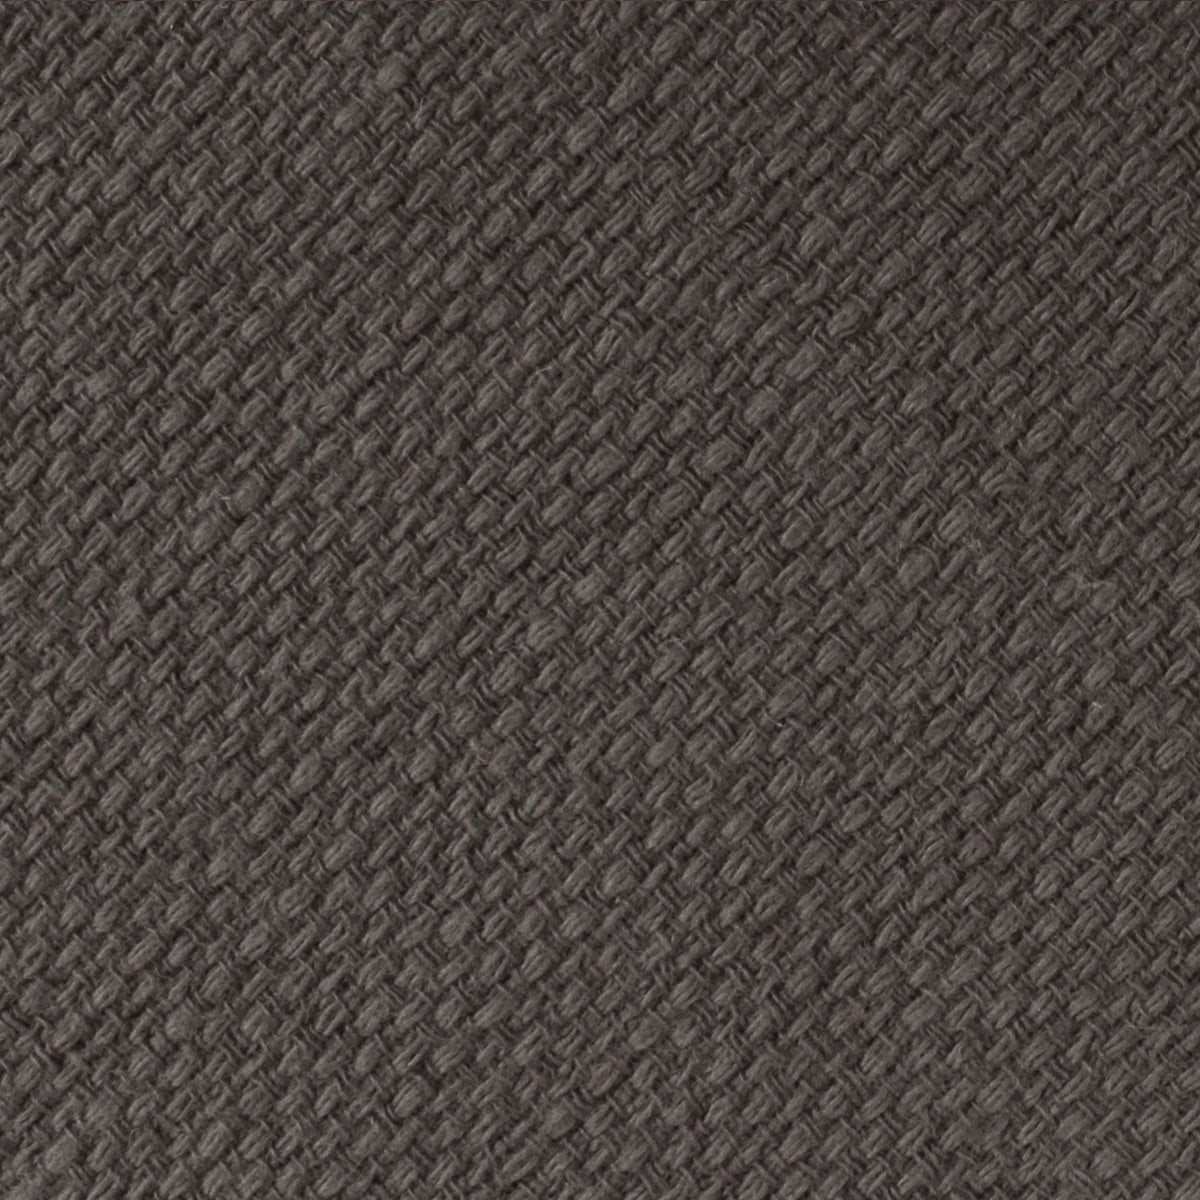 Charcoal Graphite Weave Linen Fabric Swatch